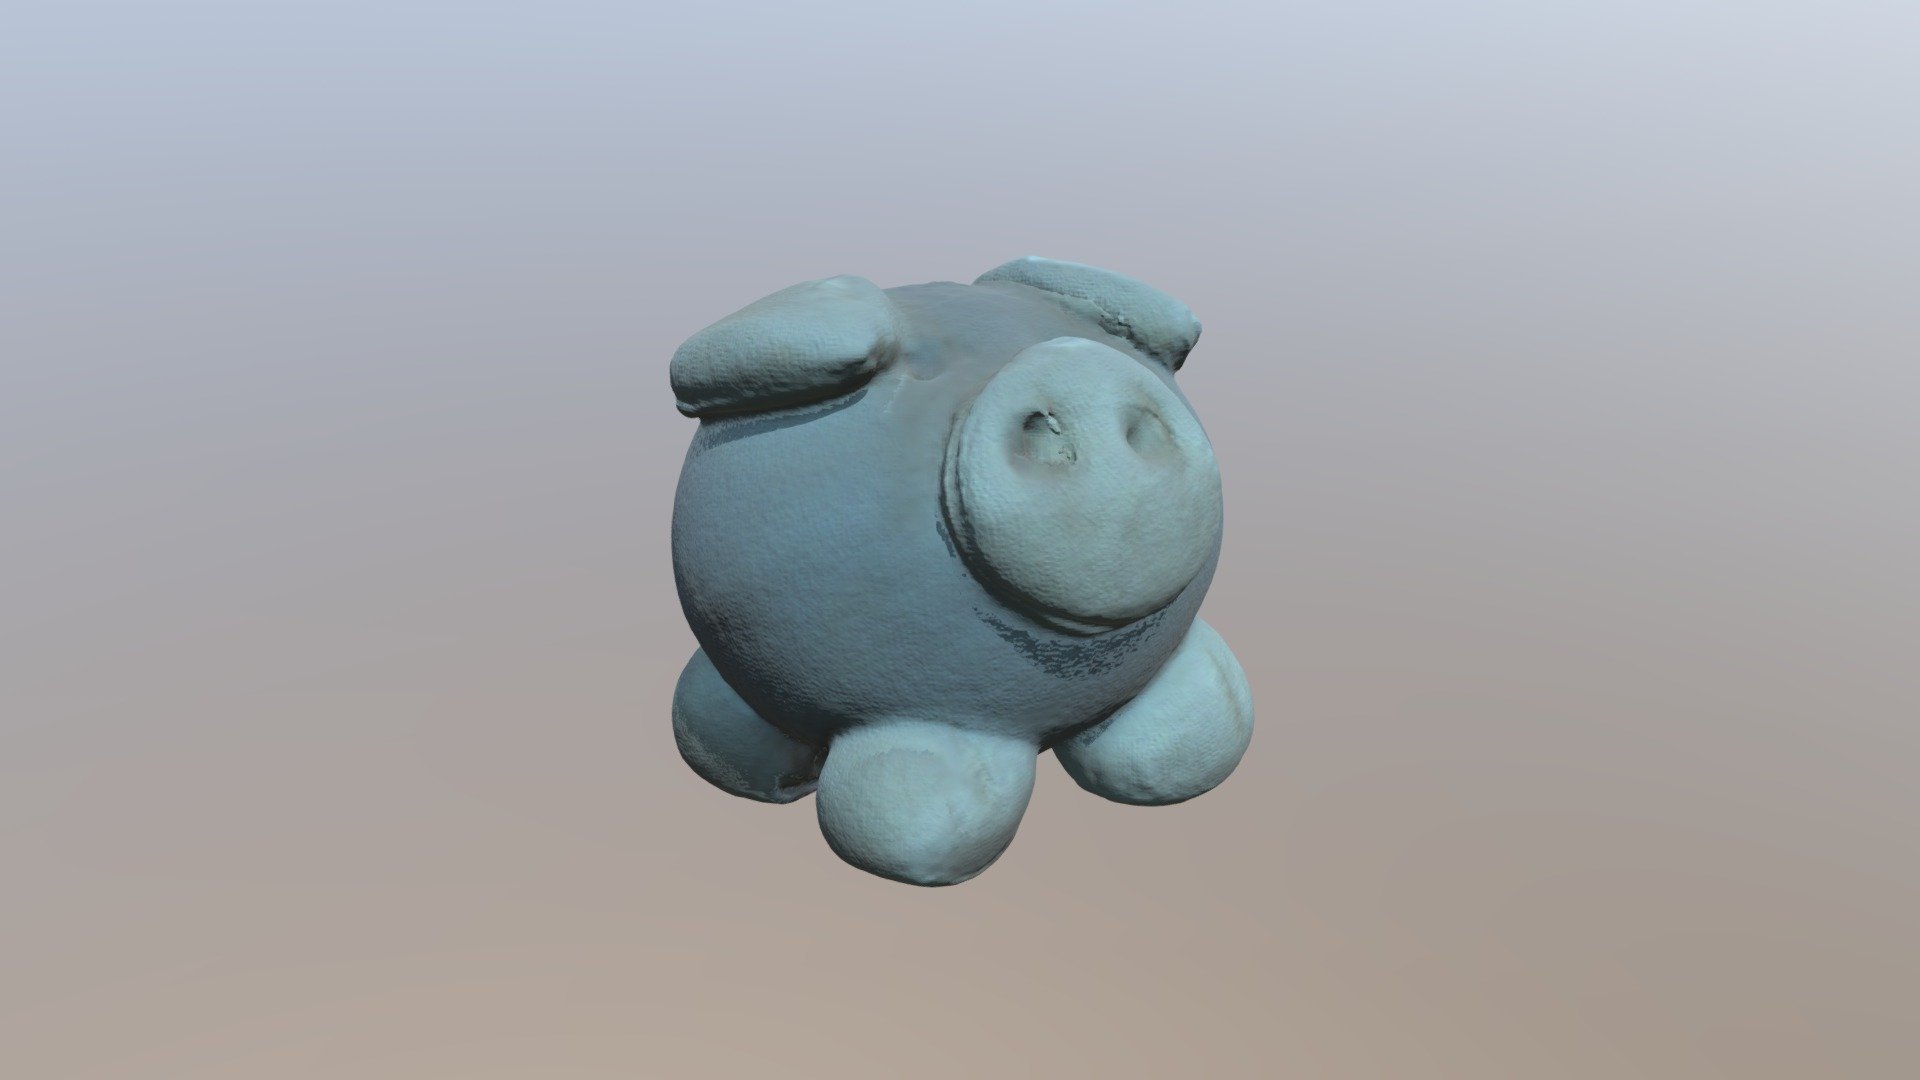 Pig figurine with color